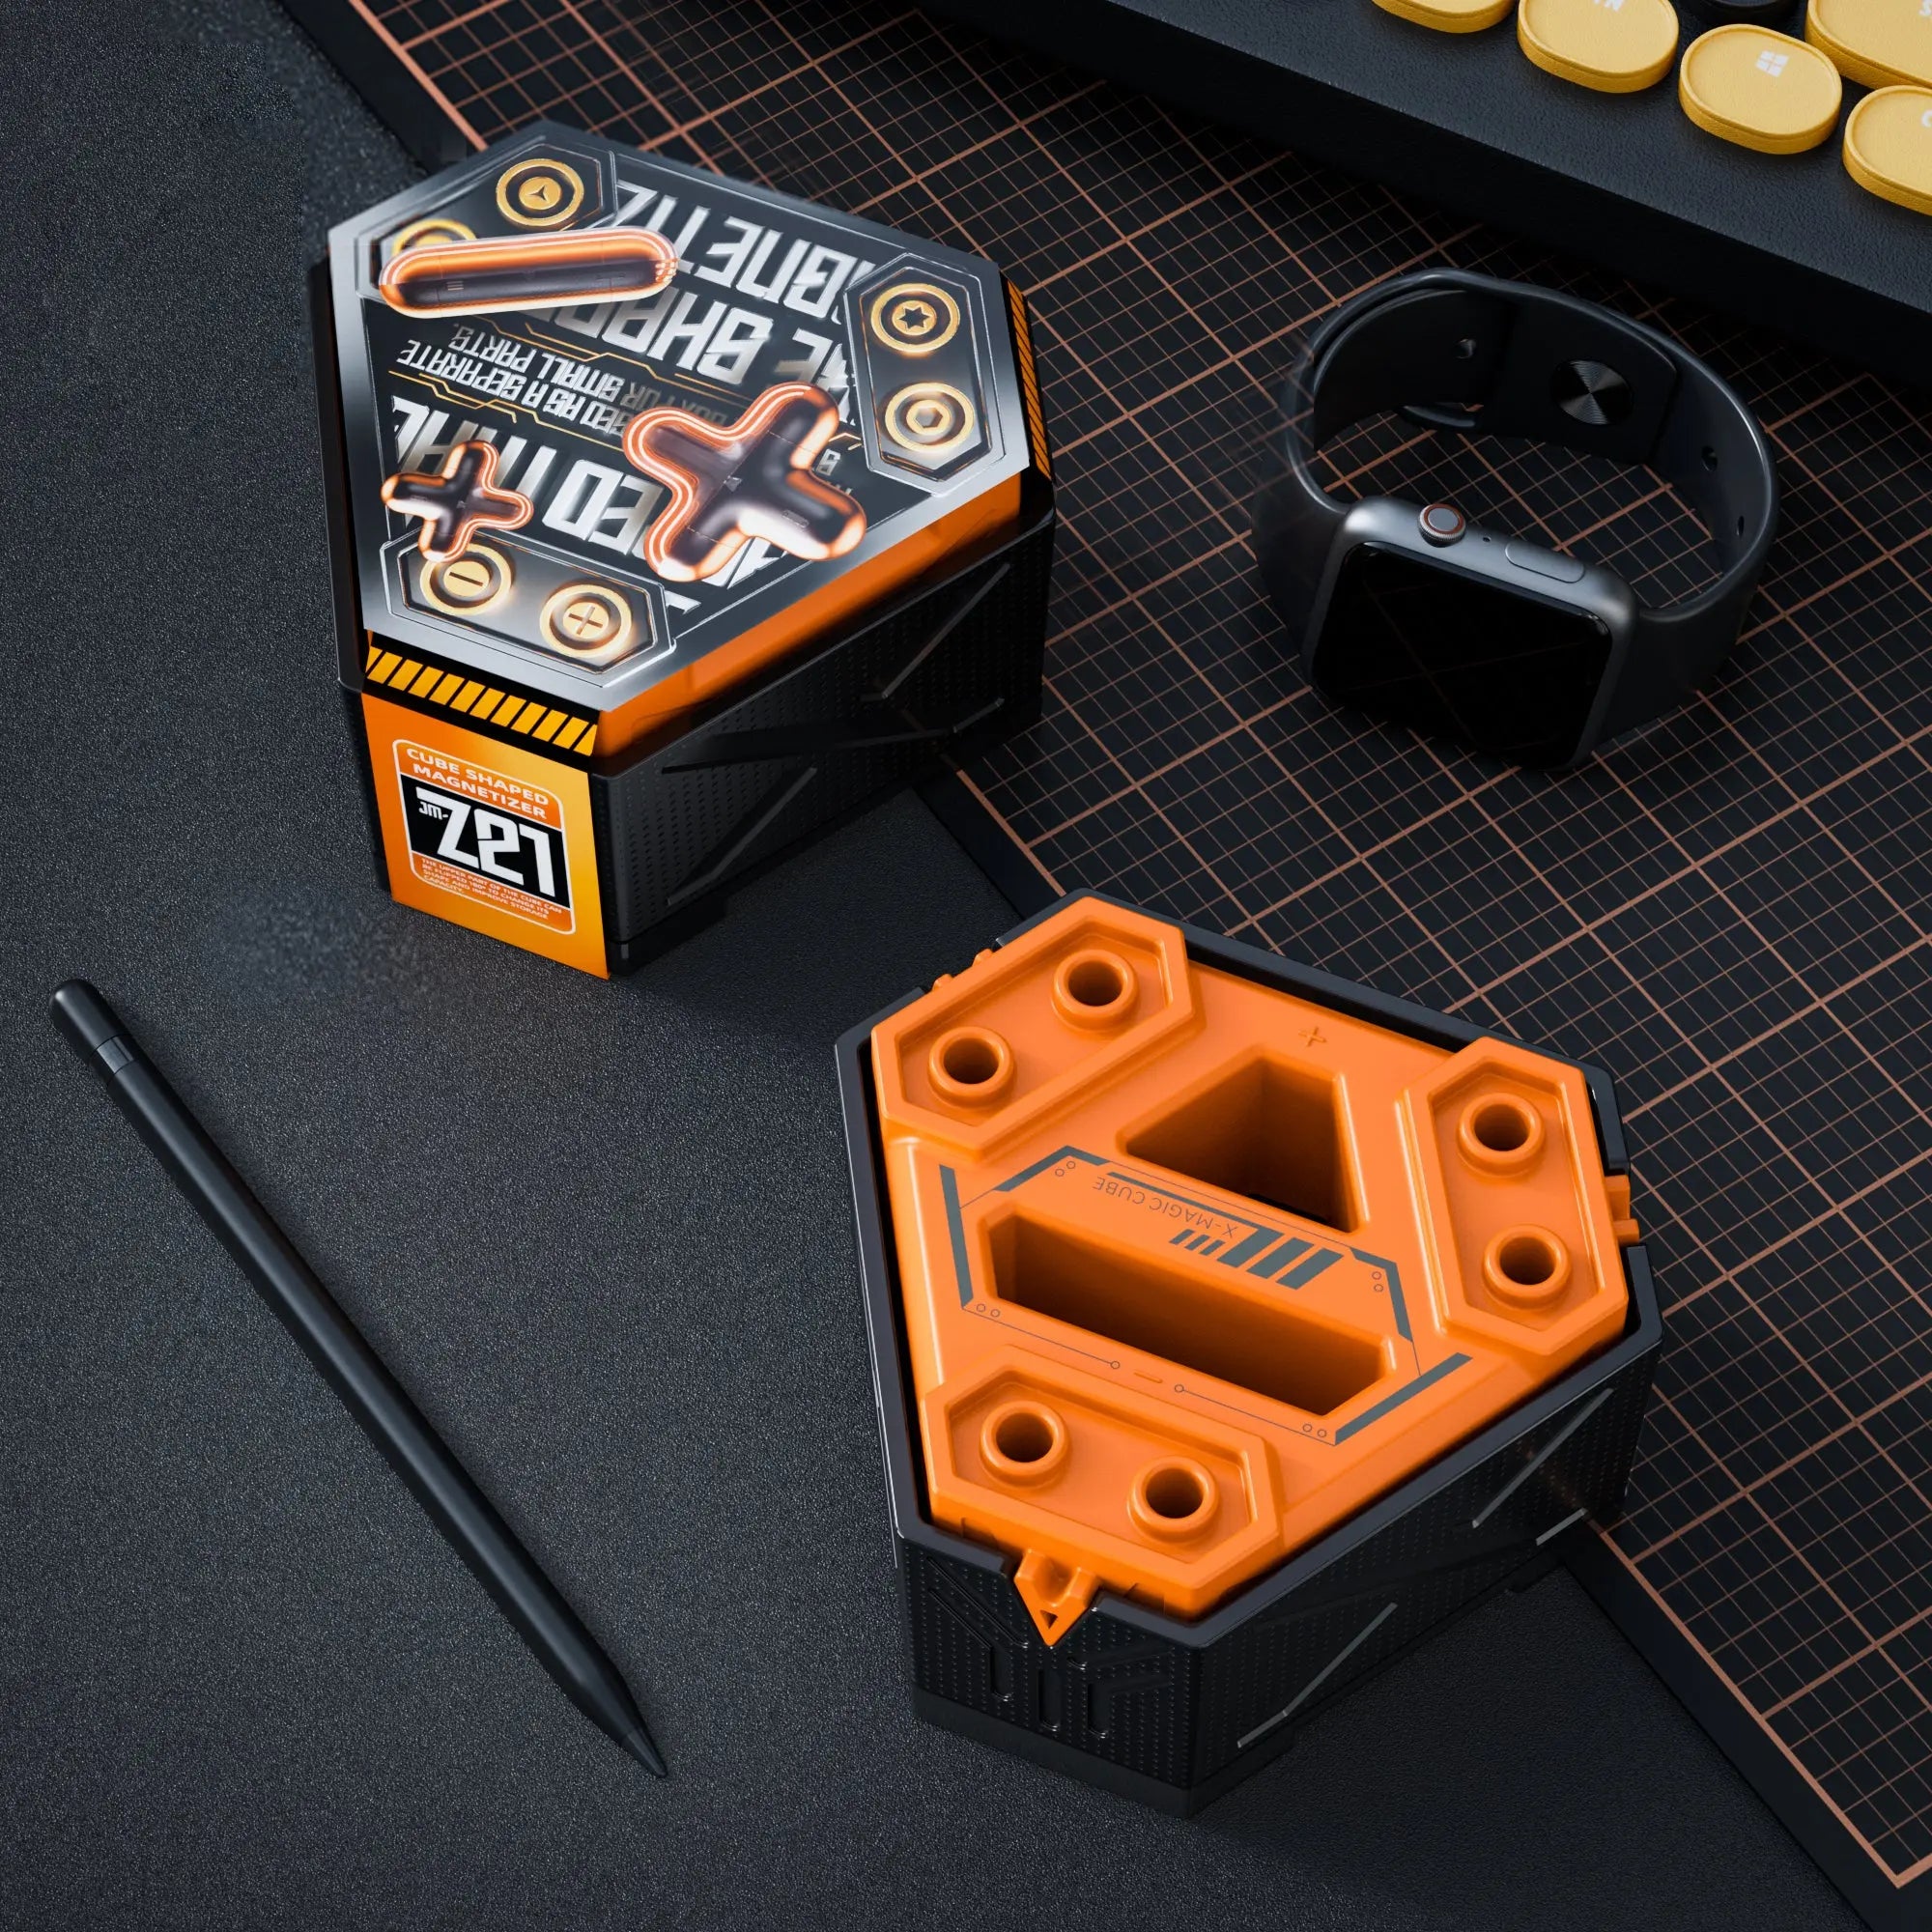 JAKEMY brand cube-shaped magnetizer for tools7